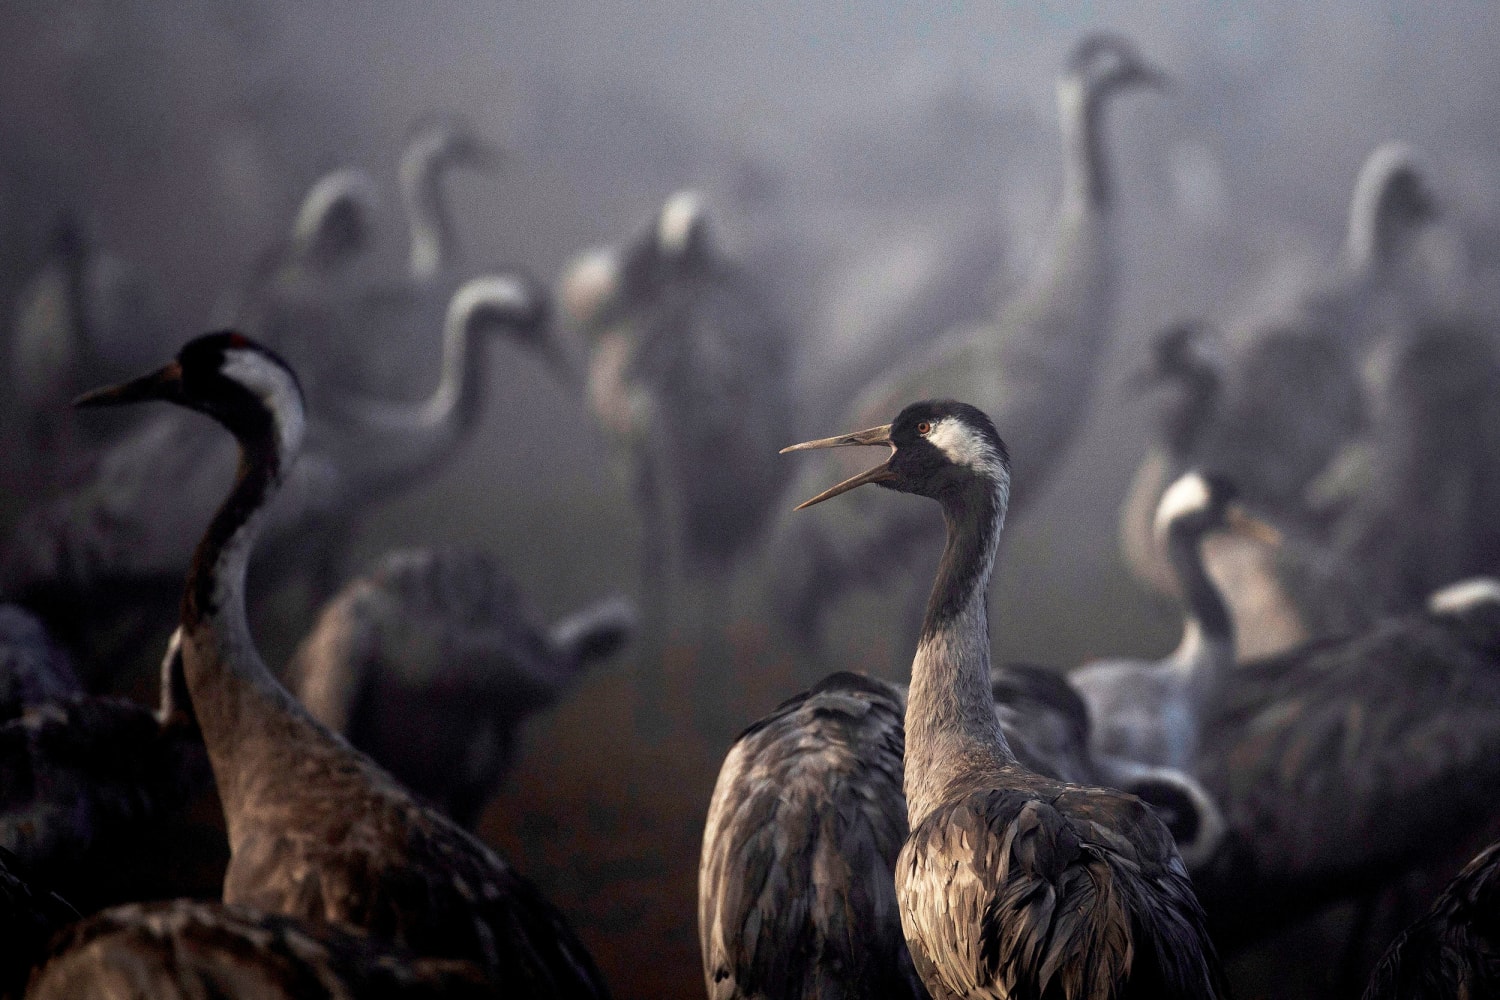 Bird flu kills thousands of cranes, forces slaughter of hundreds of thousands of chickens in Israel